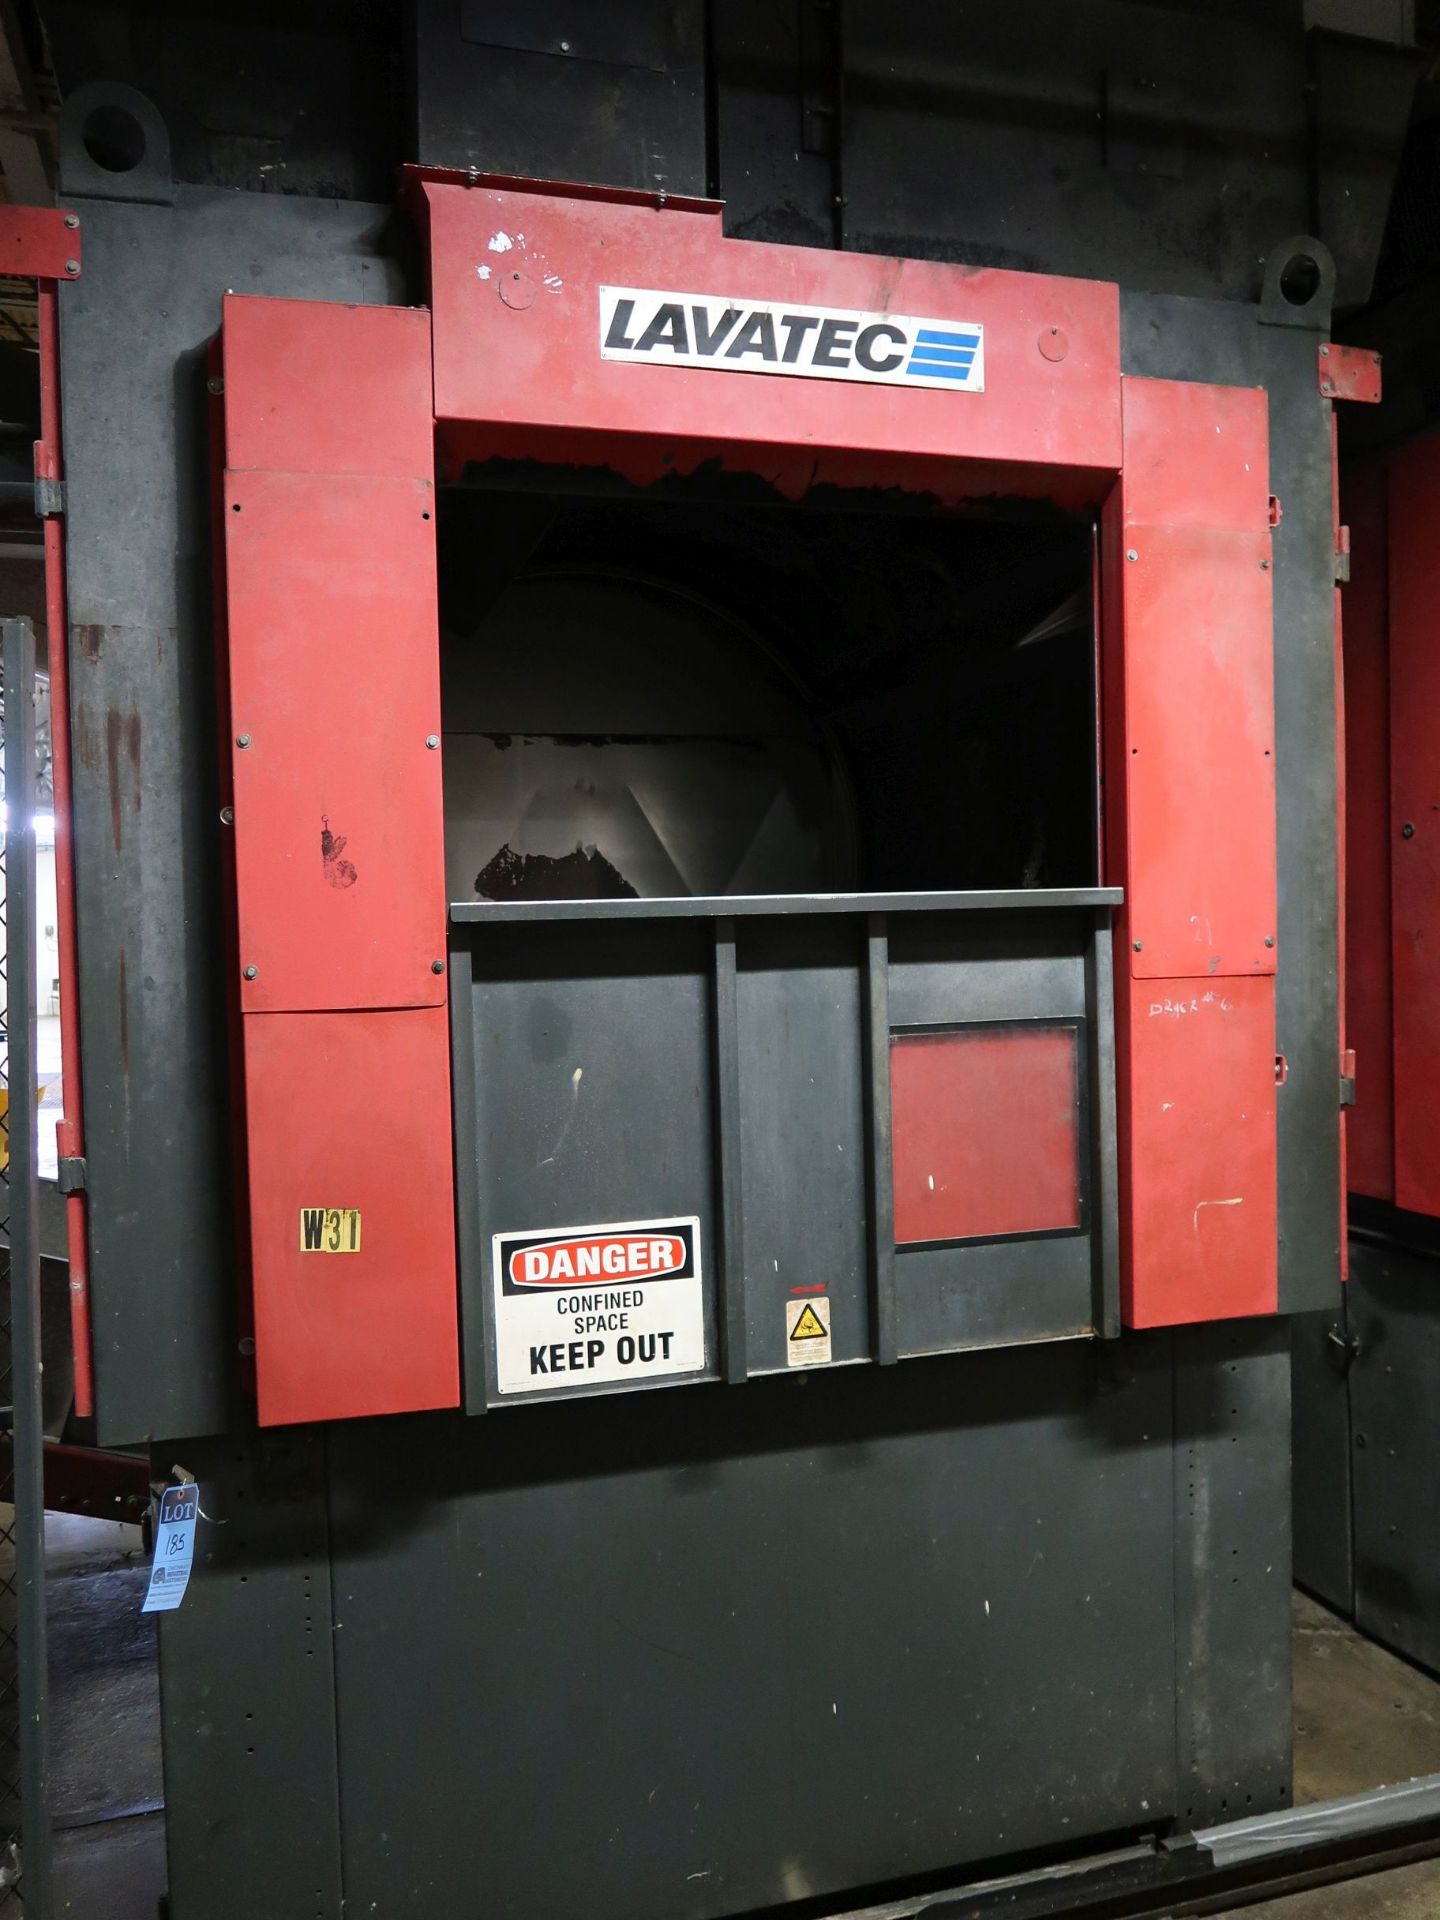 **234 LB. LAVATEC MODEL TT745G/U GAS FIRED BATCH DRYER; S/N 7450563** SUBJECT TO OVERALL BID AT